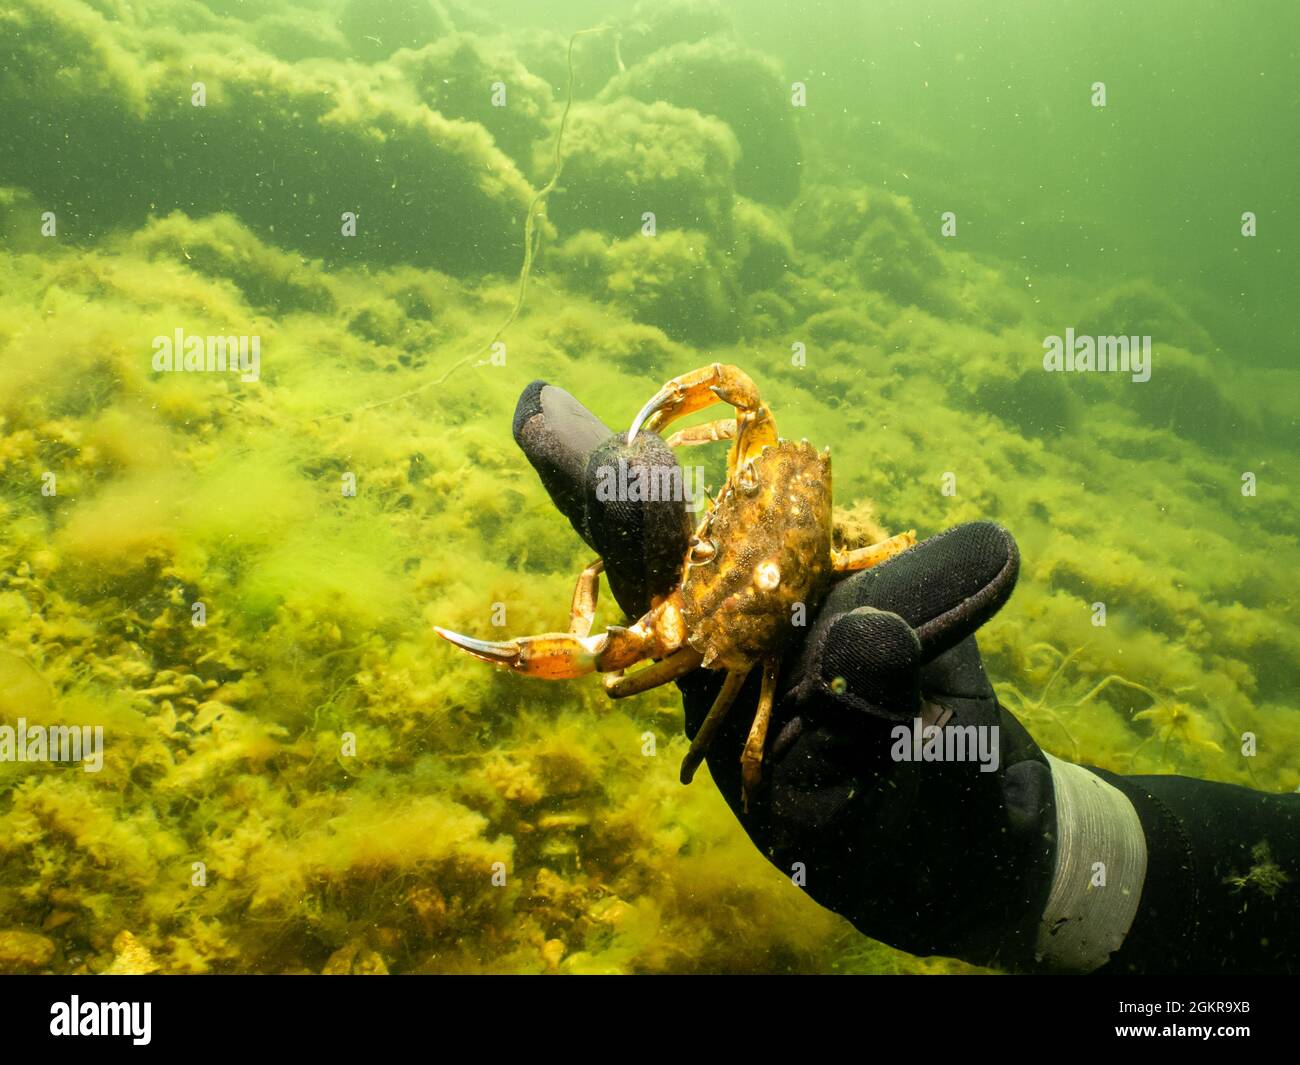 A close-up picture of a divers hand holding a crab. Green, cold water Stock Photo